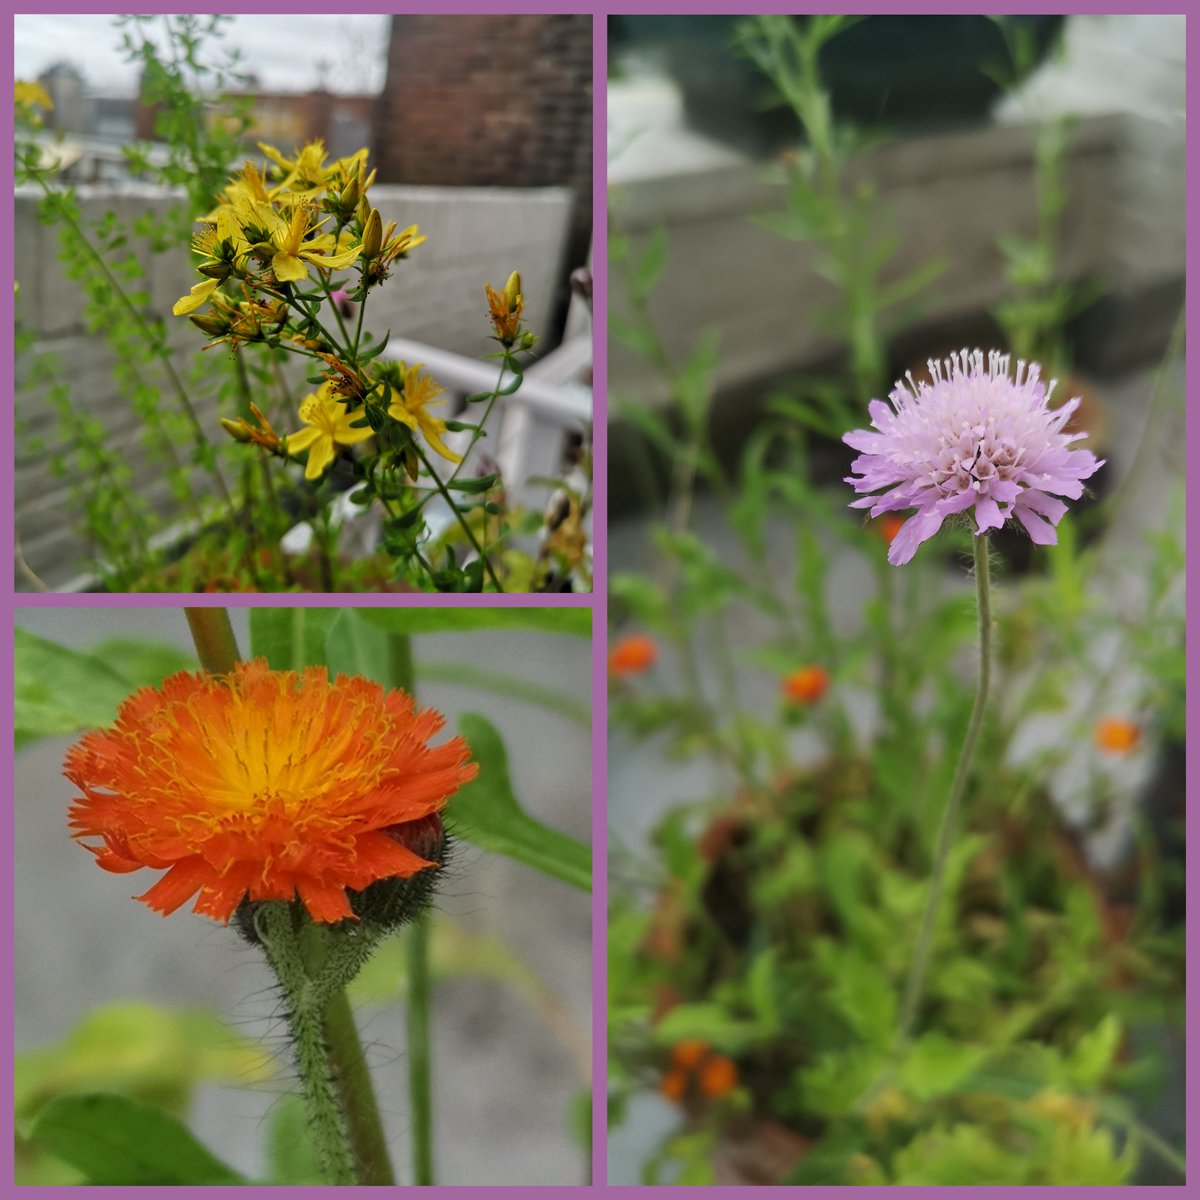 Adding to the important discussions  of native wildflora; a selection of my balcony garden plants. Native species thay help support invertebrate life as well as improving urban living/wellbeing. #urbanecology
St John's Wort 💛
Field Scabious 💜
Fox and Cubs  🧡
doing well